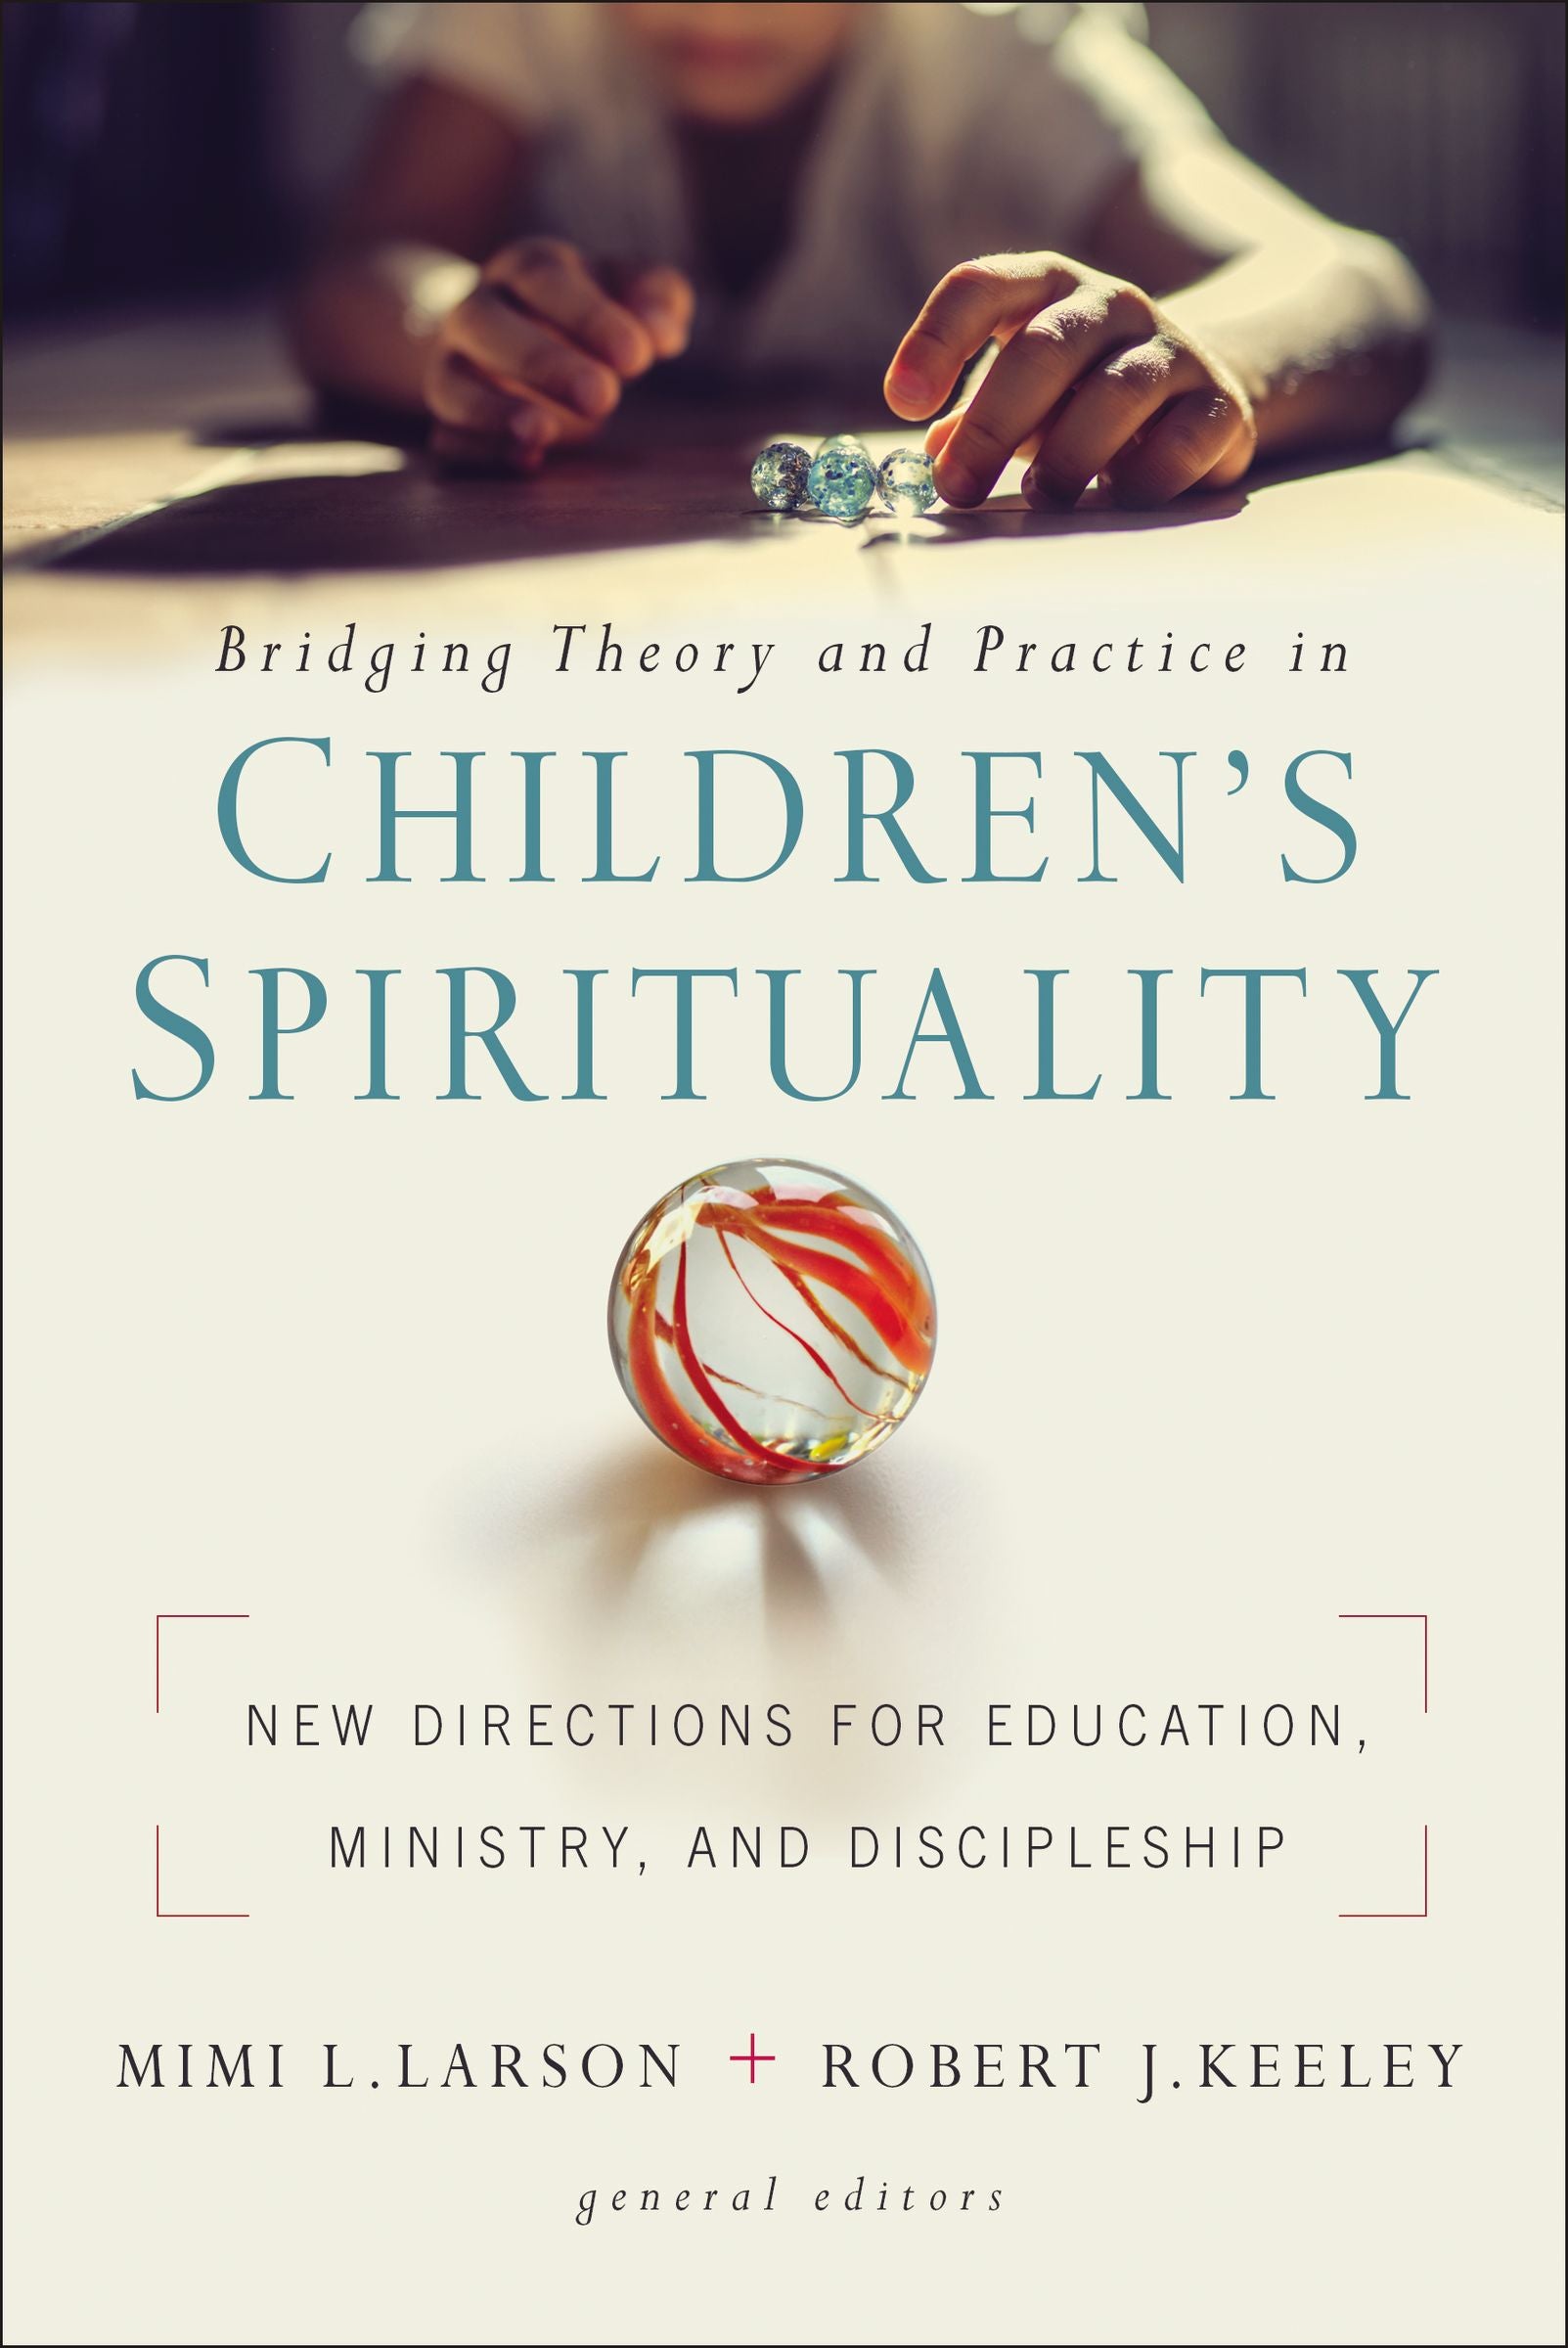 Image of Bridging Theory and Practice in Children's Spirituality other